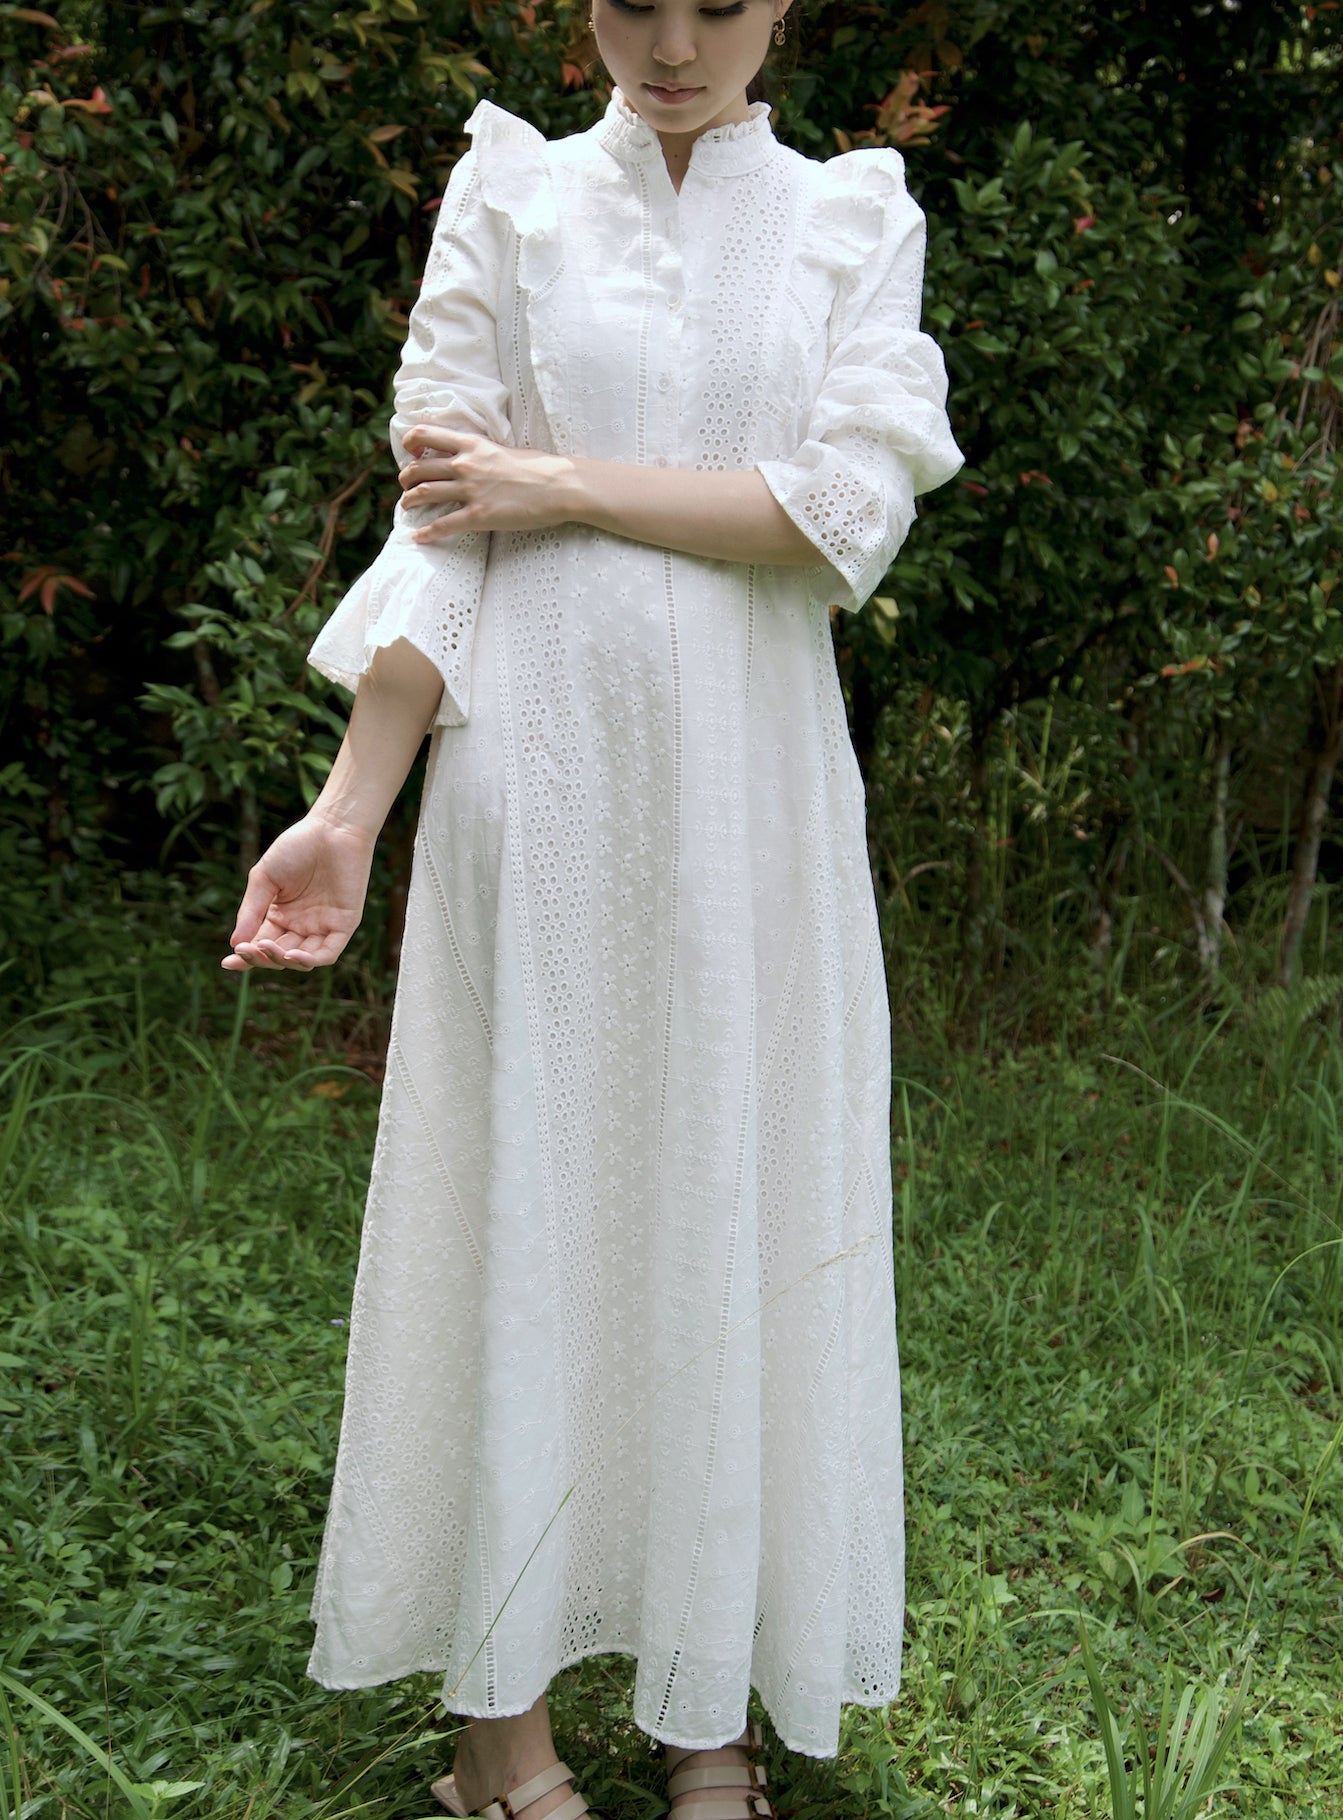 In 100% premium organic cotton, our ZORA Pearl dress is our love letter to broderie anglaise, with a bias cut to illuminate the beauty of its intricate floral detailing. This dress combines some of our favourite features - high ruffle-trimmed collar, button down ruffled bodice, puffed sleeves leading down to a perfect flutter sleeves at wrist length, and floral embroidery detailing at random. 